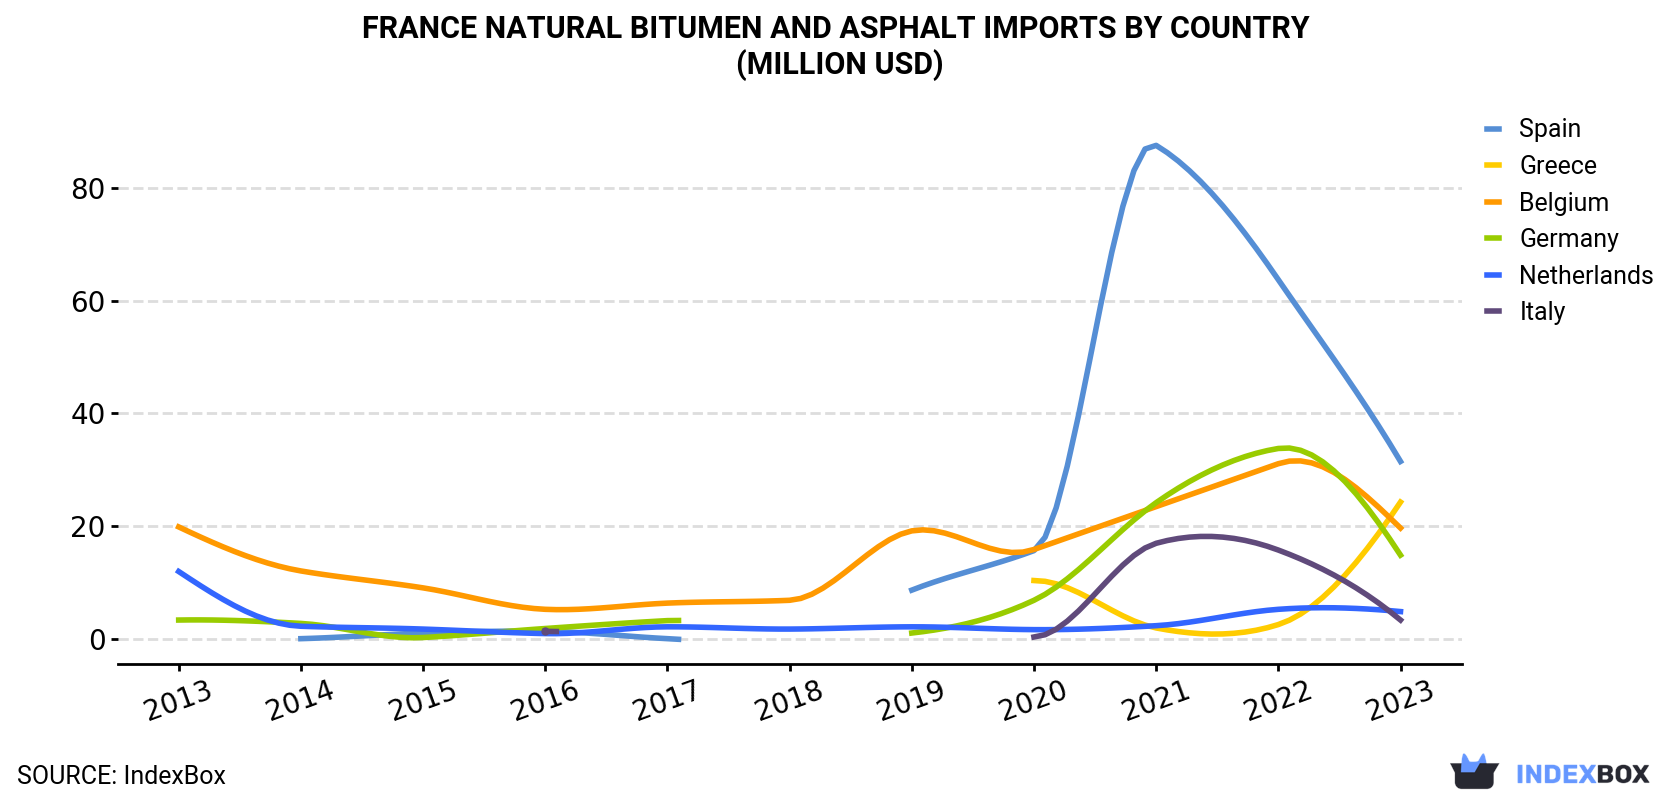 France Natural Bitumen and Asphalt Imports By Country (Million USD)